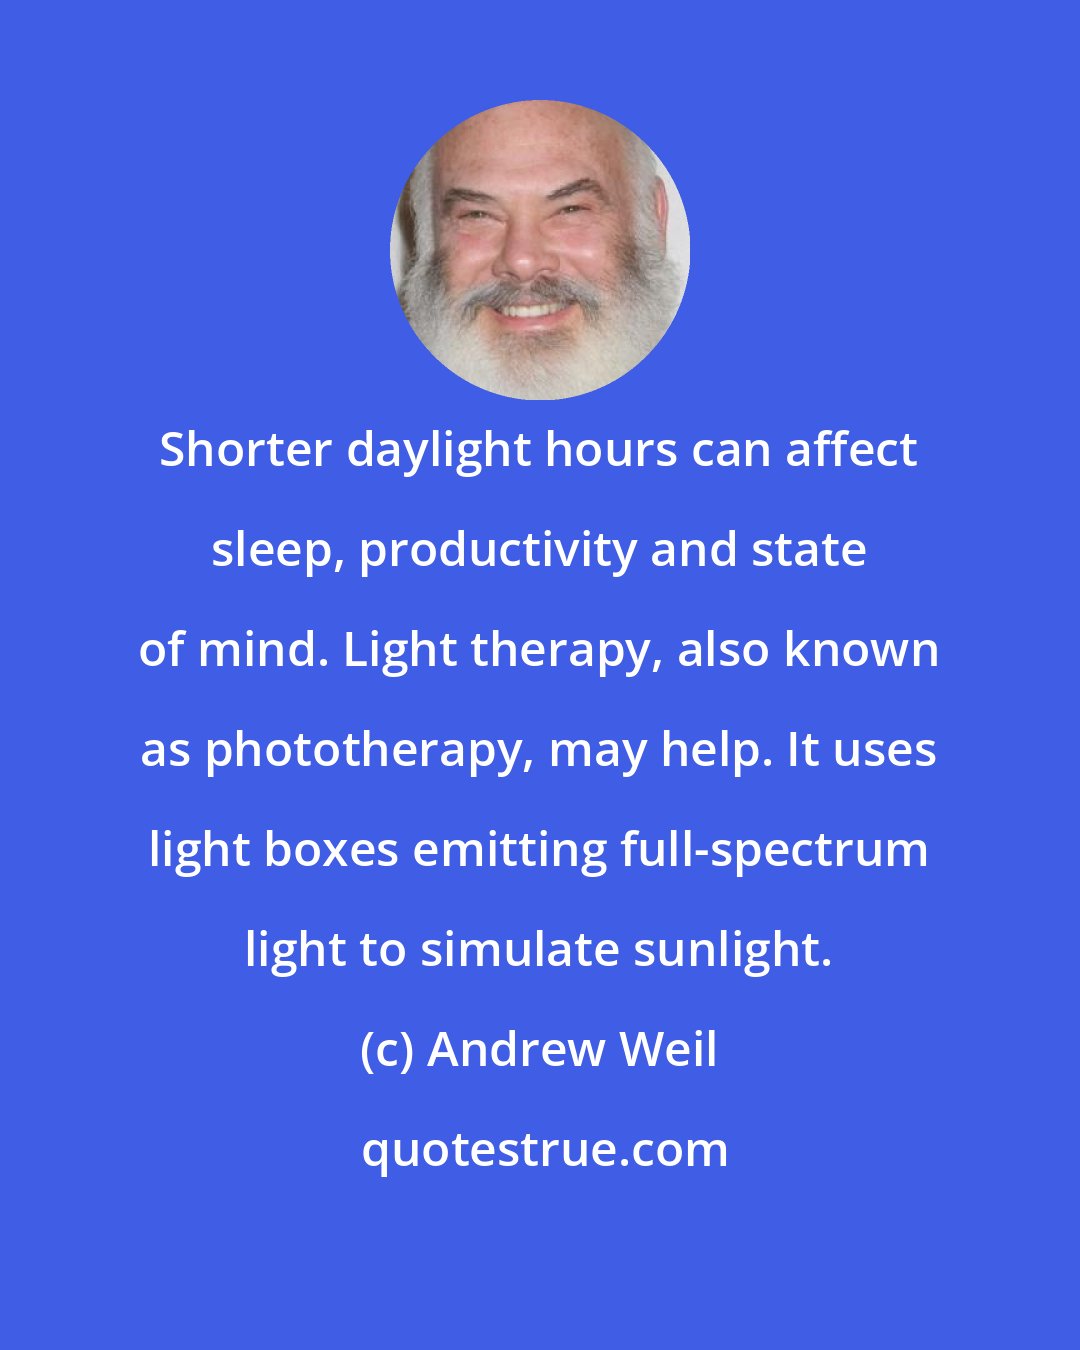 Andrew Weil: Shorter daylight hours can affect sleep, productivity and state of mind. Light therapy, also known as phototherapy, may help. It uses light boxes emitting full-spectrum light to simulate sunlight.